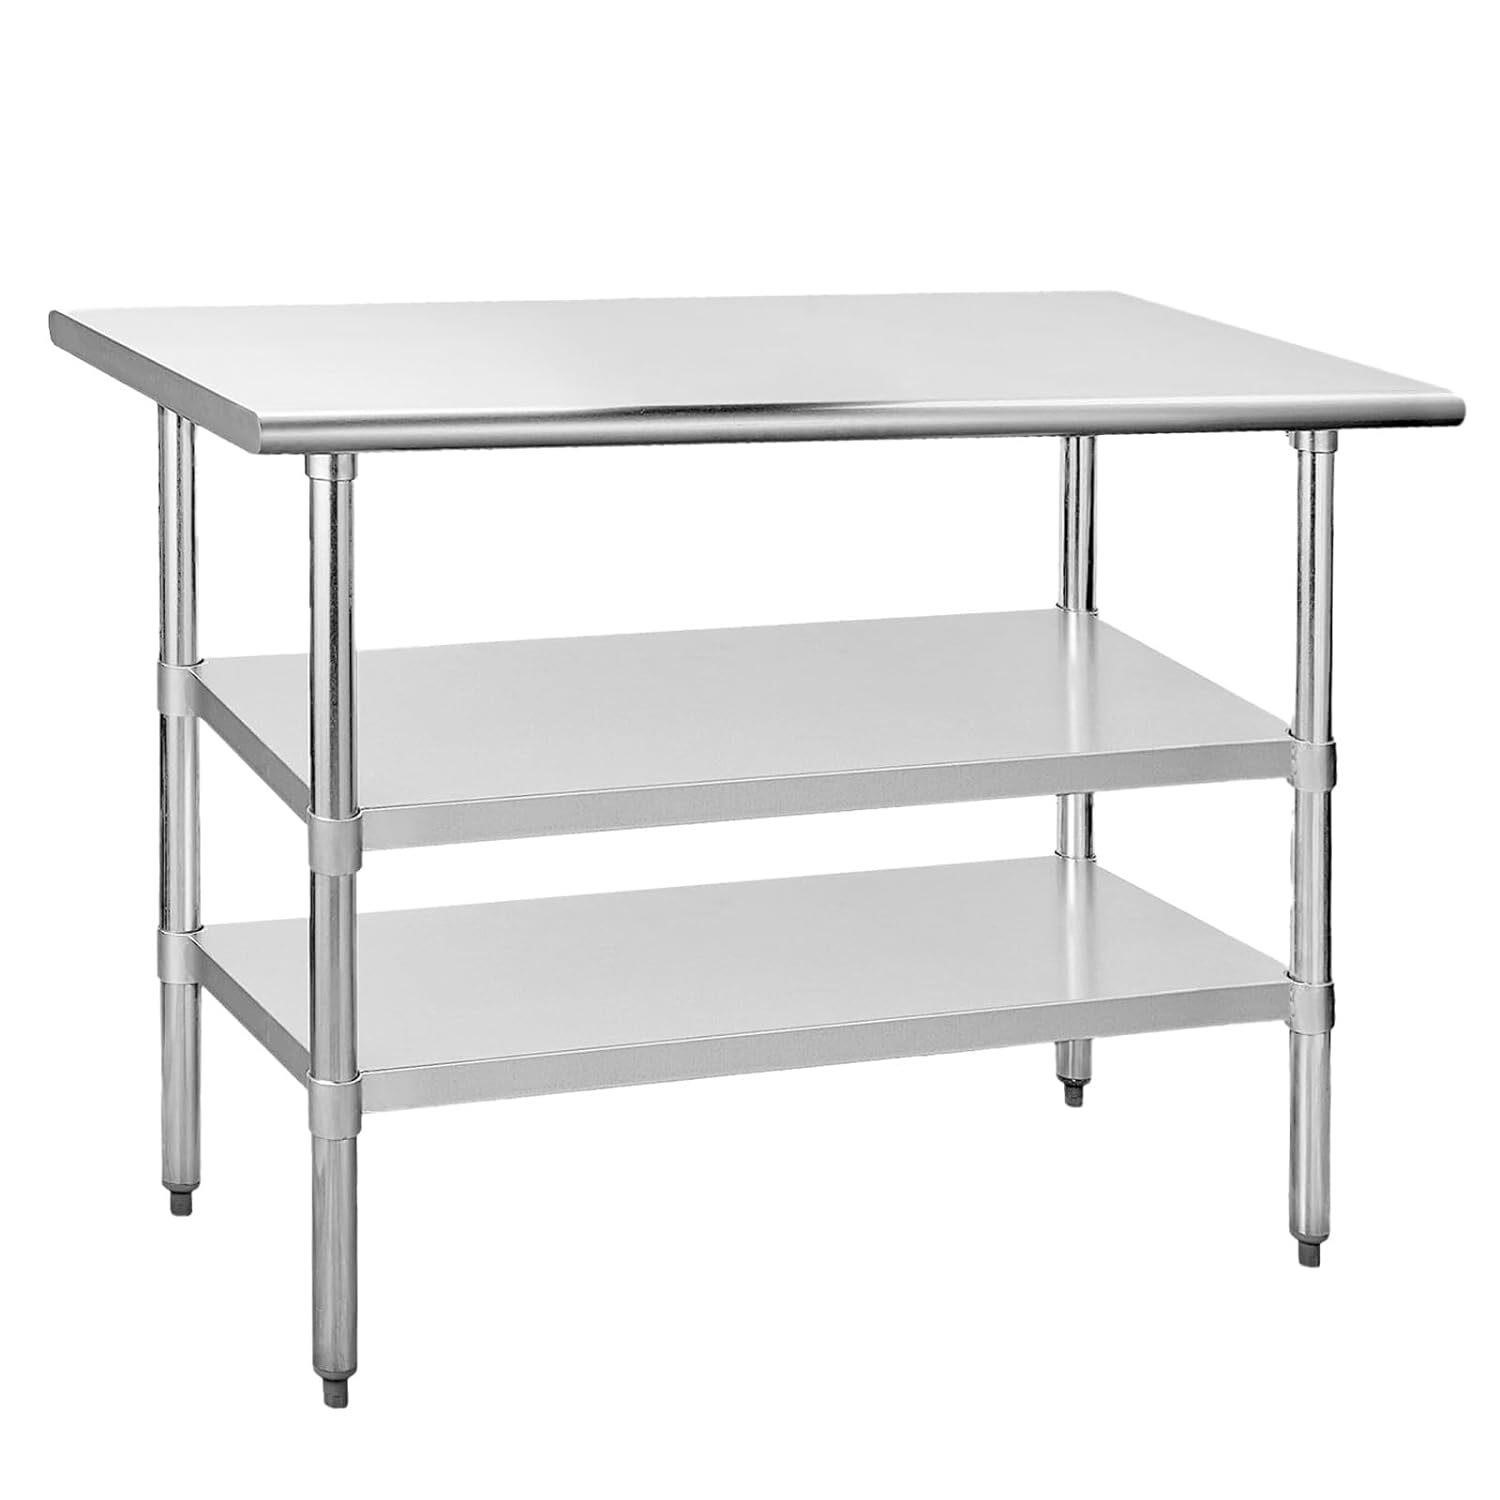 24x48 Stainless Steel Table with 2 Shelves